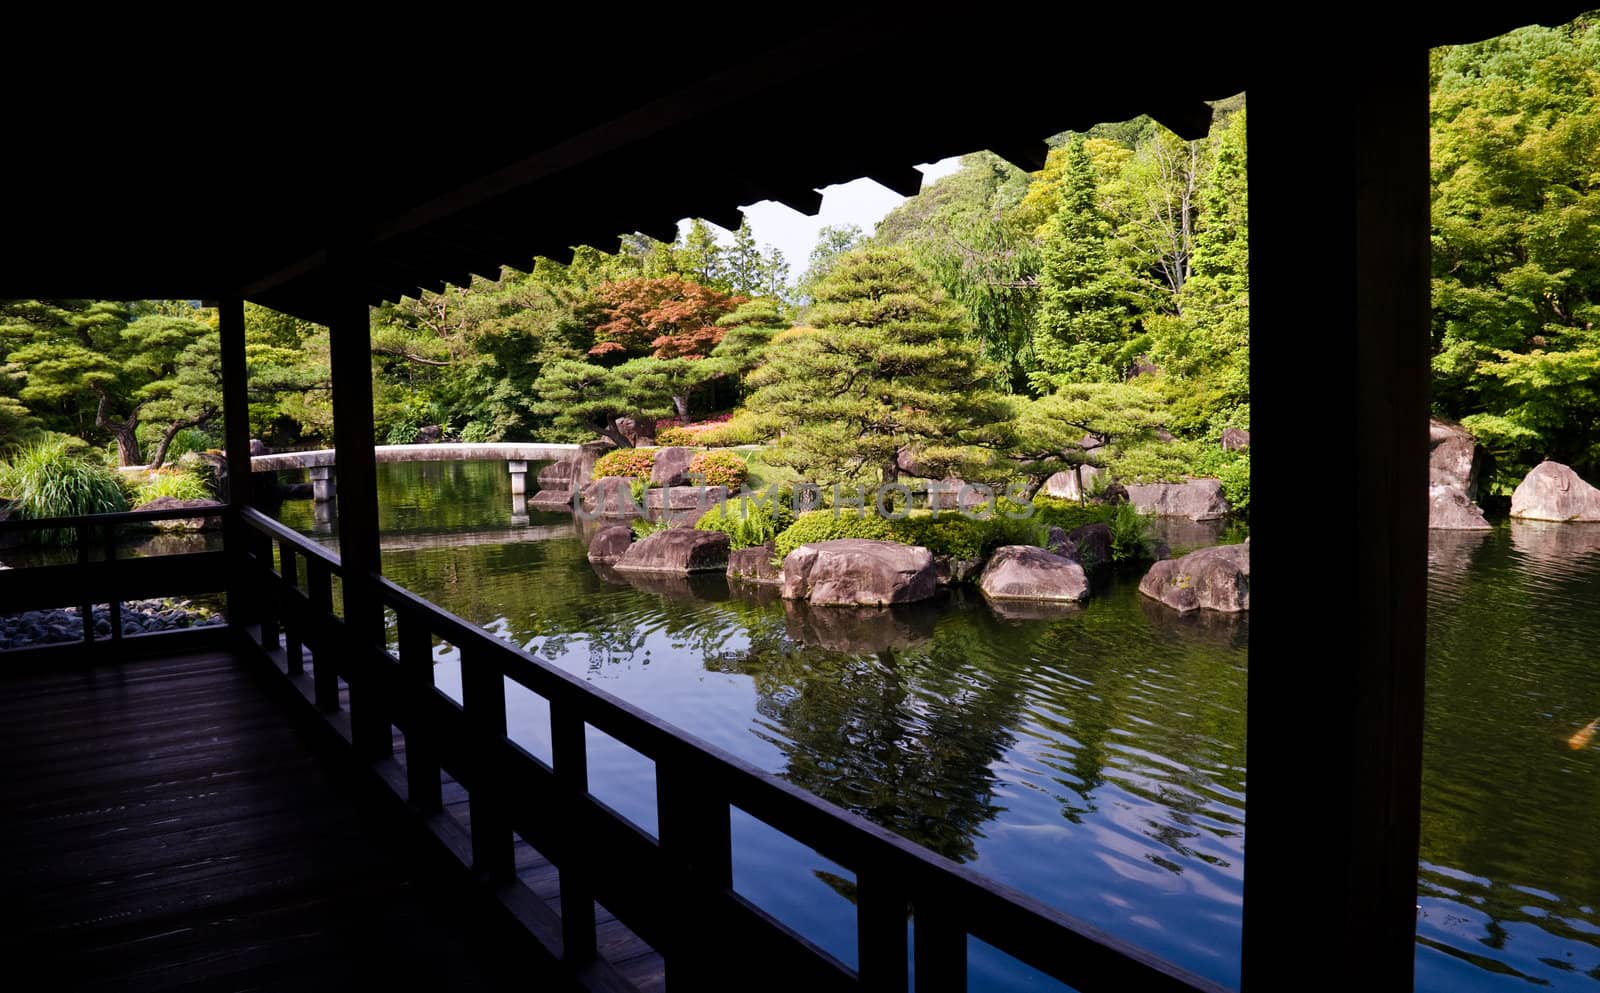 A pond in a traditional Japanese garden. by 300pixel